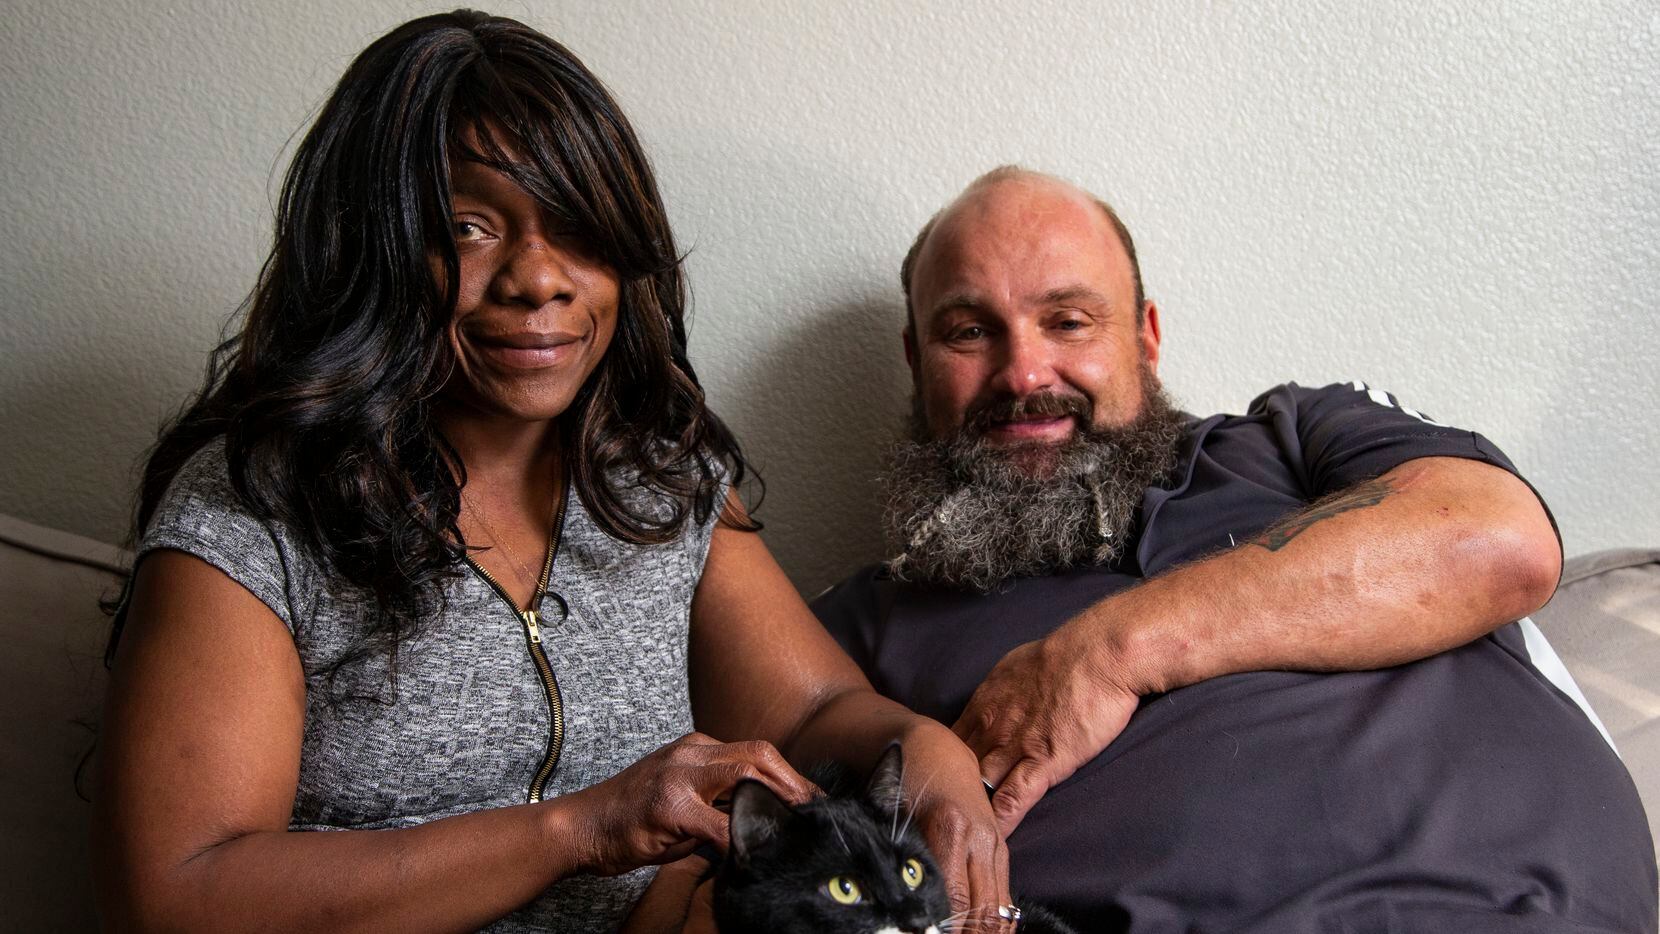 Deborah and Jonathan Vaughn were happy to be able to welcome their cat, Wubdabewy (think “rub the belly” in baby talk), at their new apartment in Dallas. The couple spent time camping on the streets because they couldn't find a home that would allow their pet.